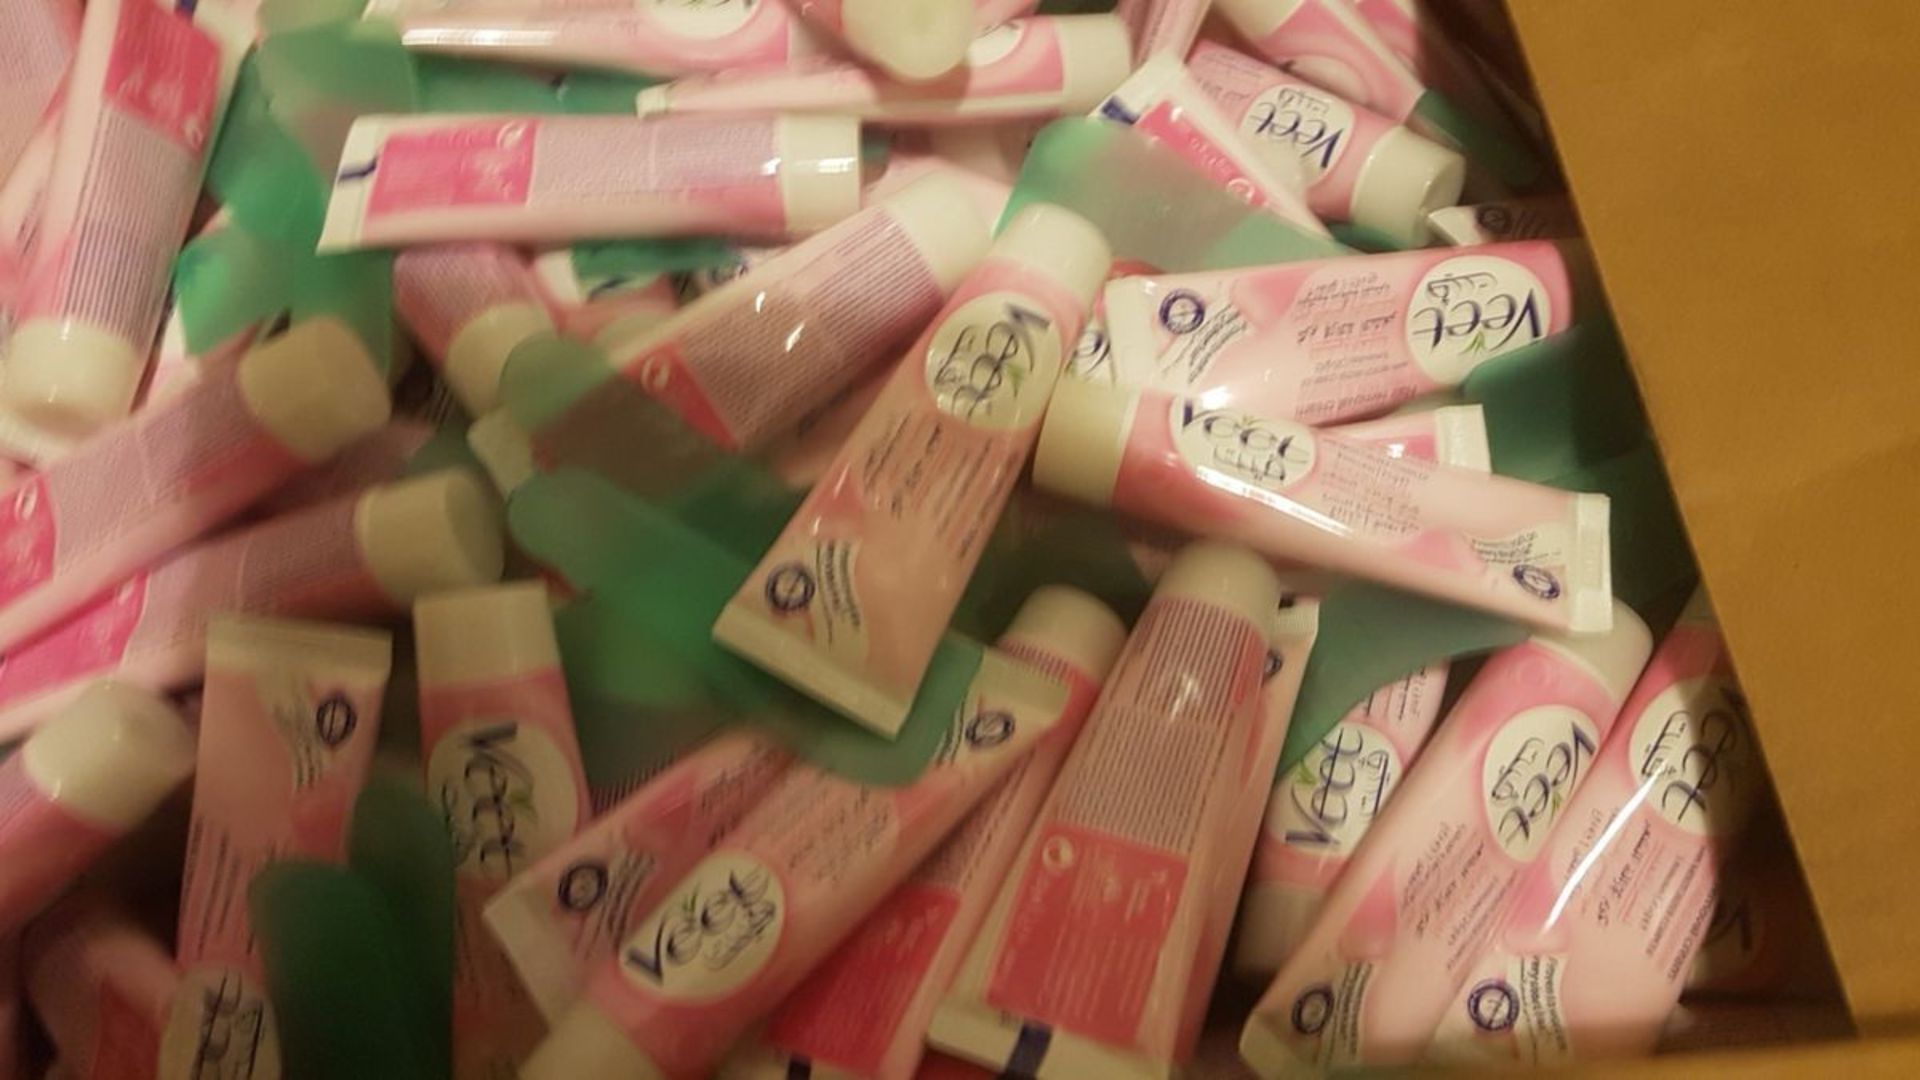 200 tubes of Veet 25g hair removal cream - Image 2 of 2